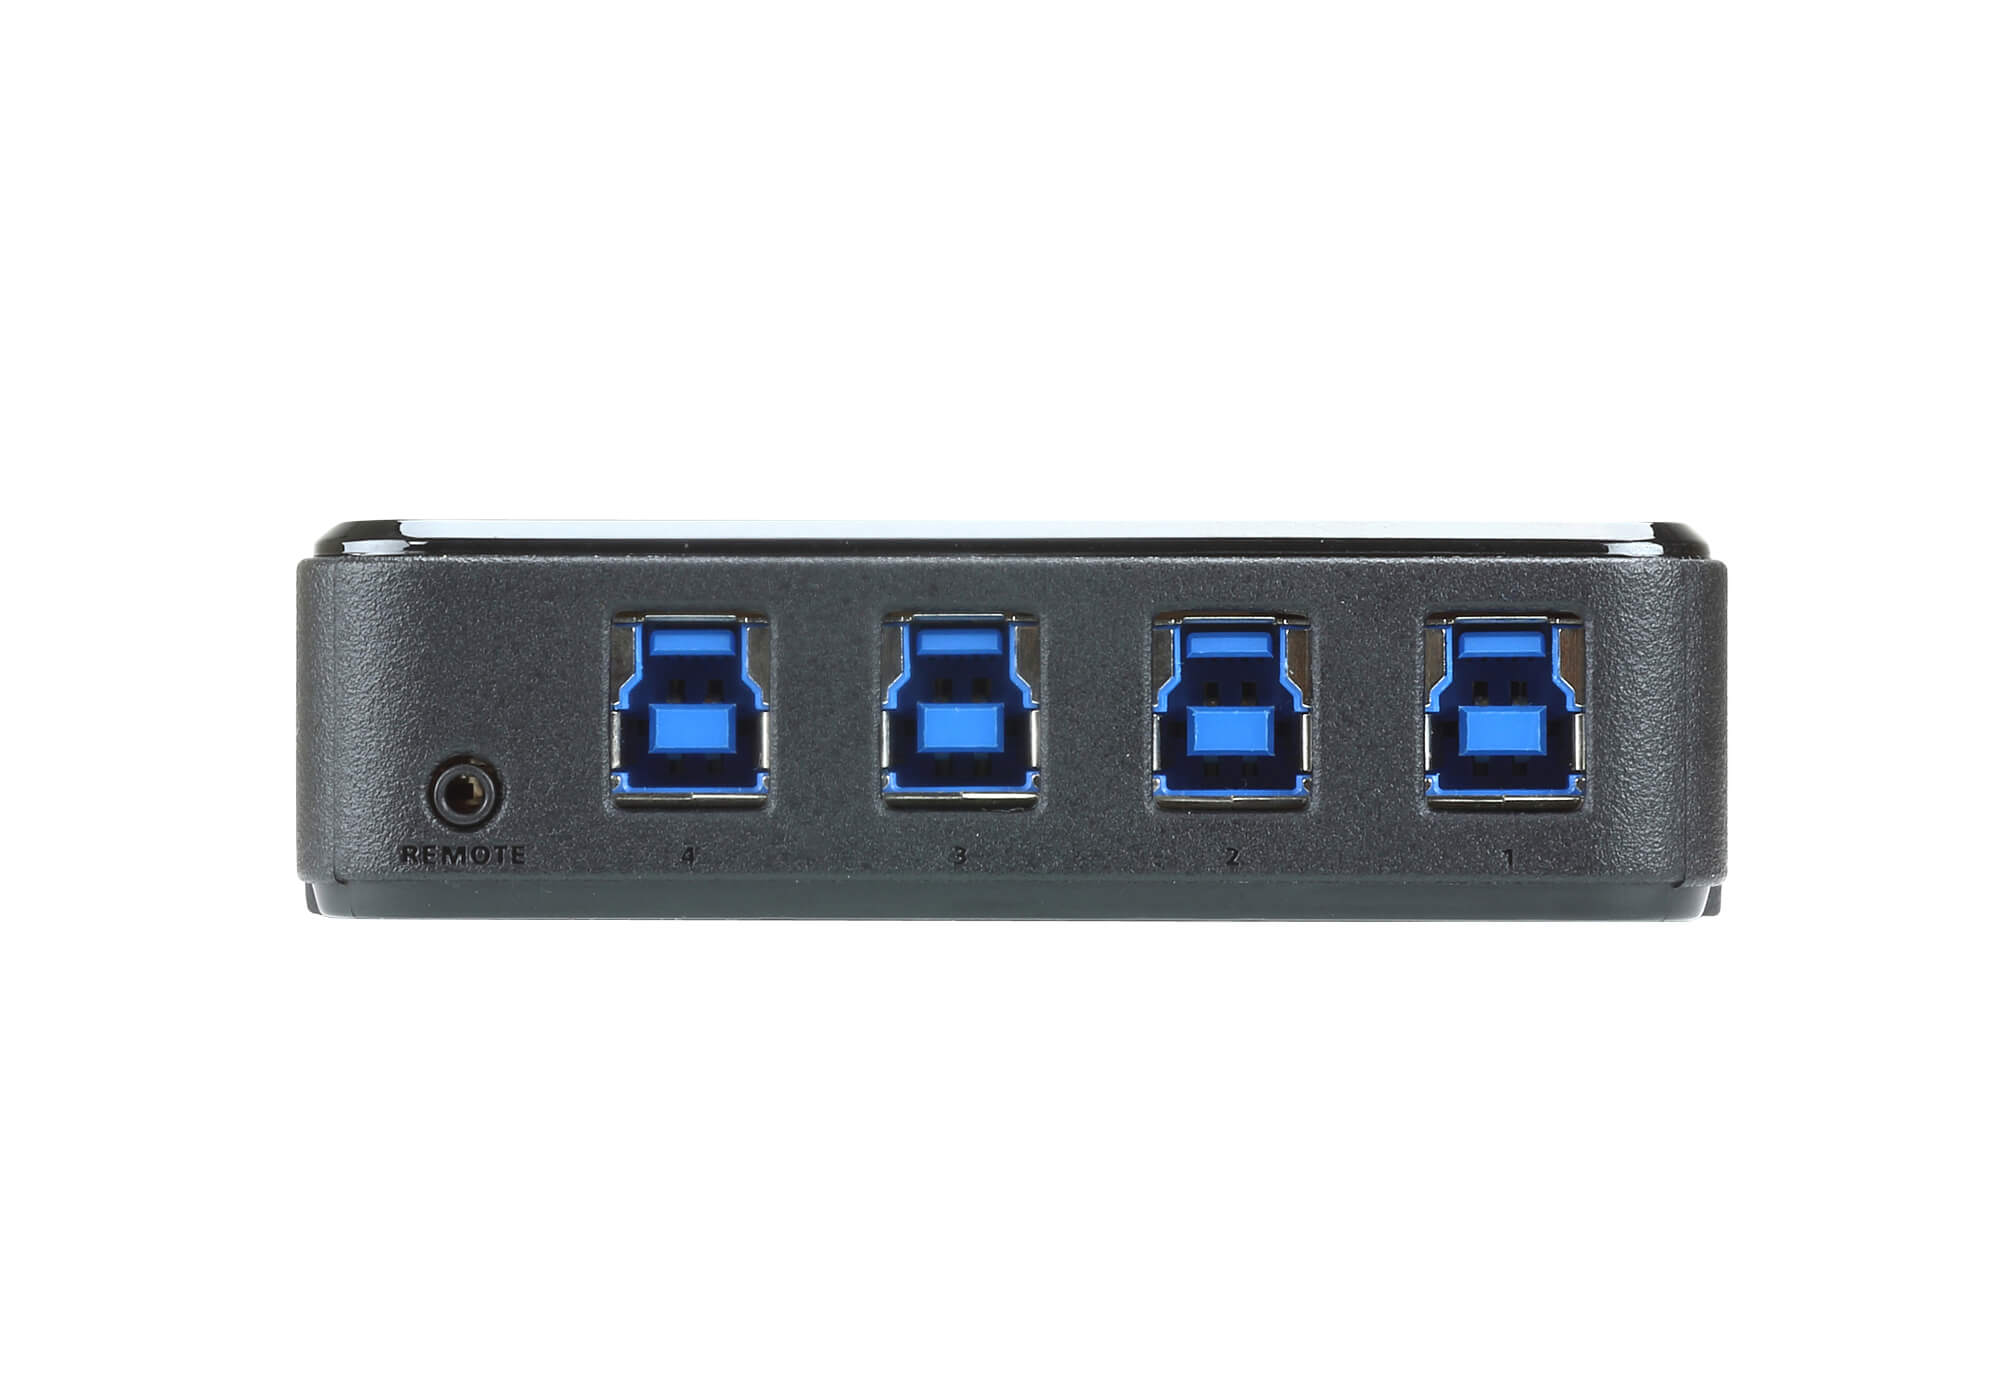 Aten Peripheral Switch 4×4 USB 3.1 Gen1, 4x PC, 4x USB 3.1 Gen1 Ports, Remote Port Selector, Plug and Play